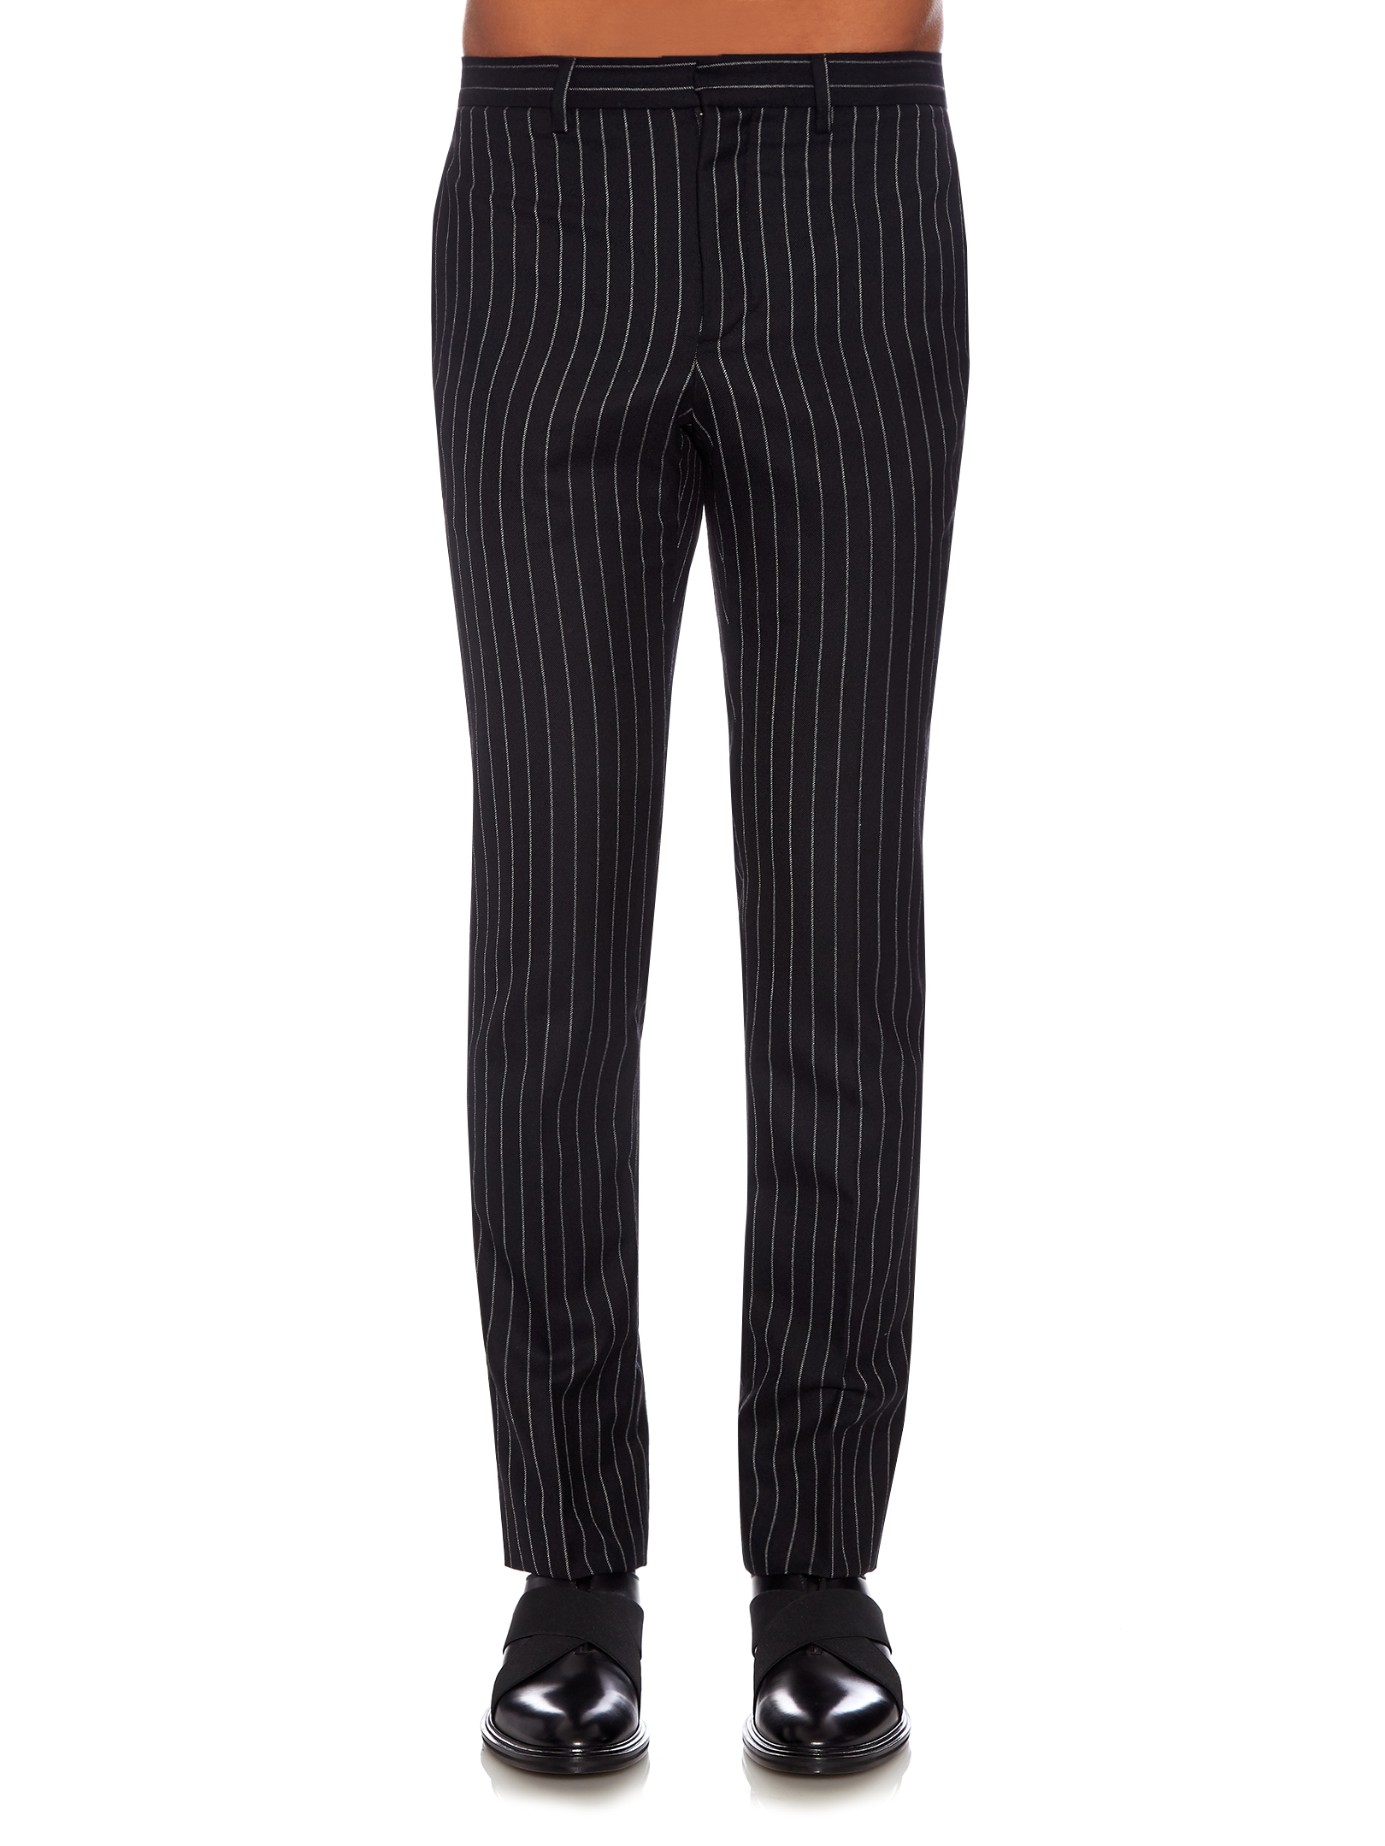 Lyst - Givenchy Pinstripe Slim-fit Wool Trousers in Black for Men